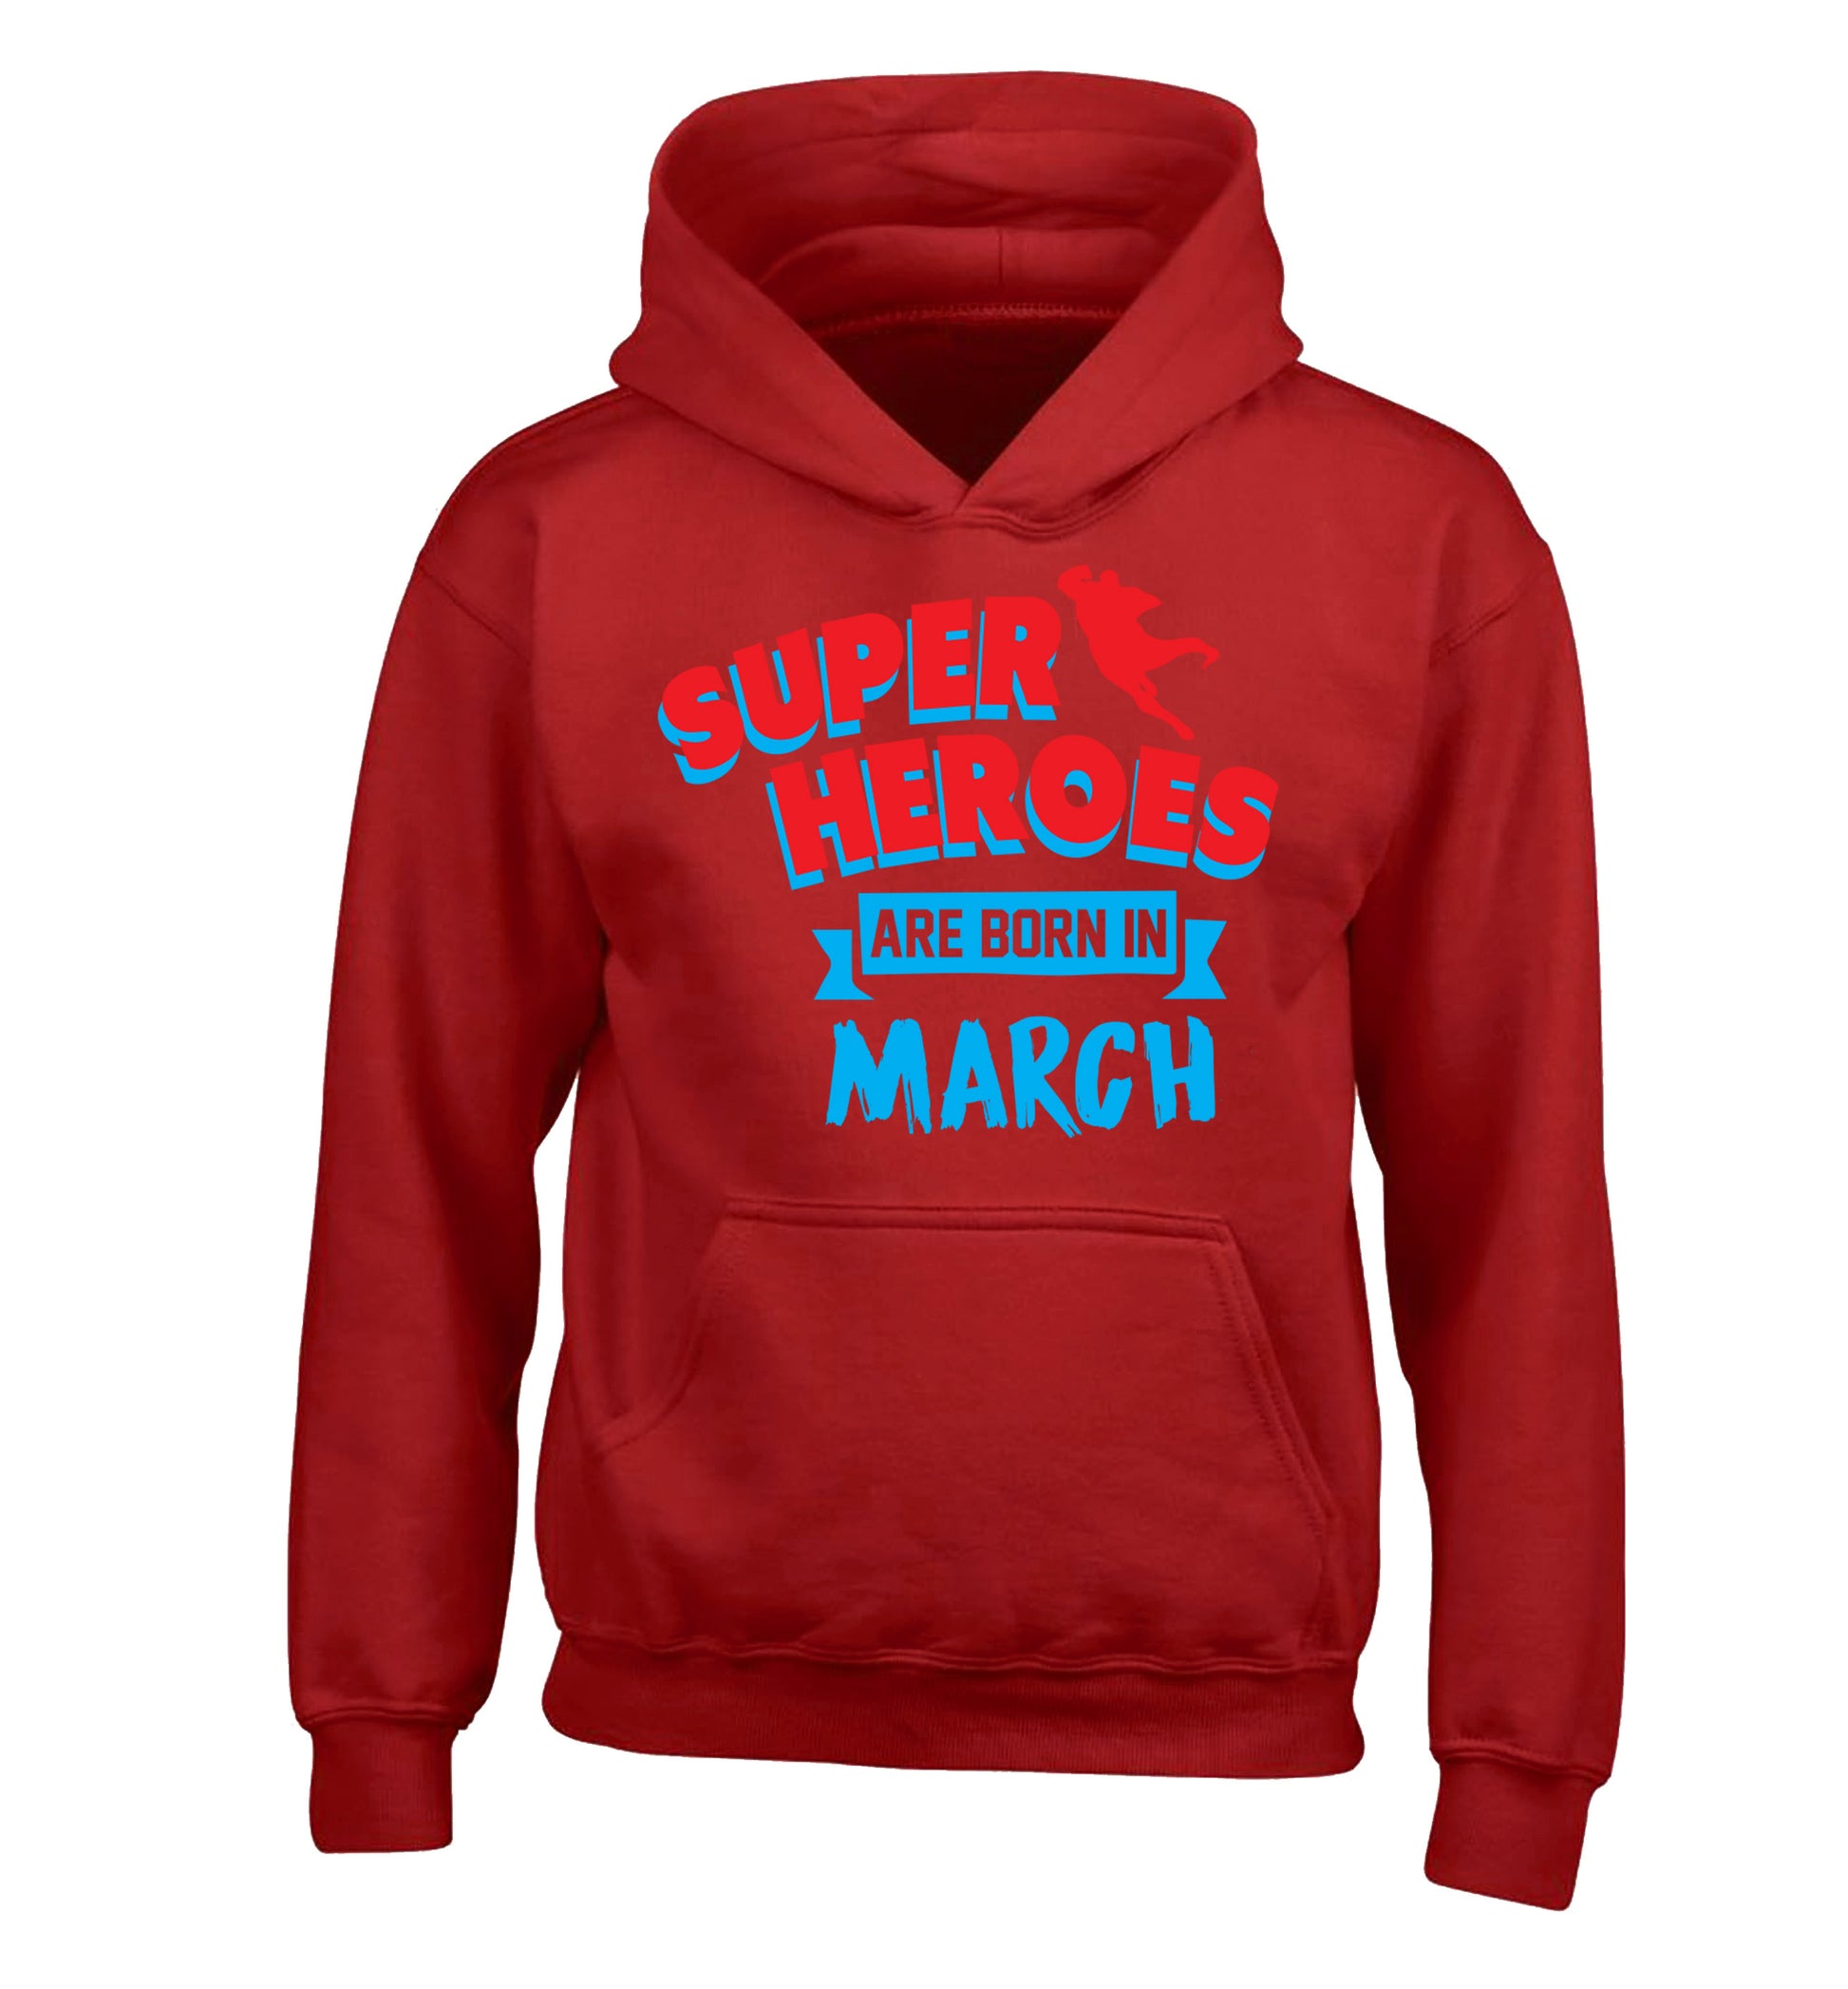 Superheros are born in March children's red hoodie 12-13 Years